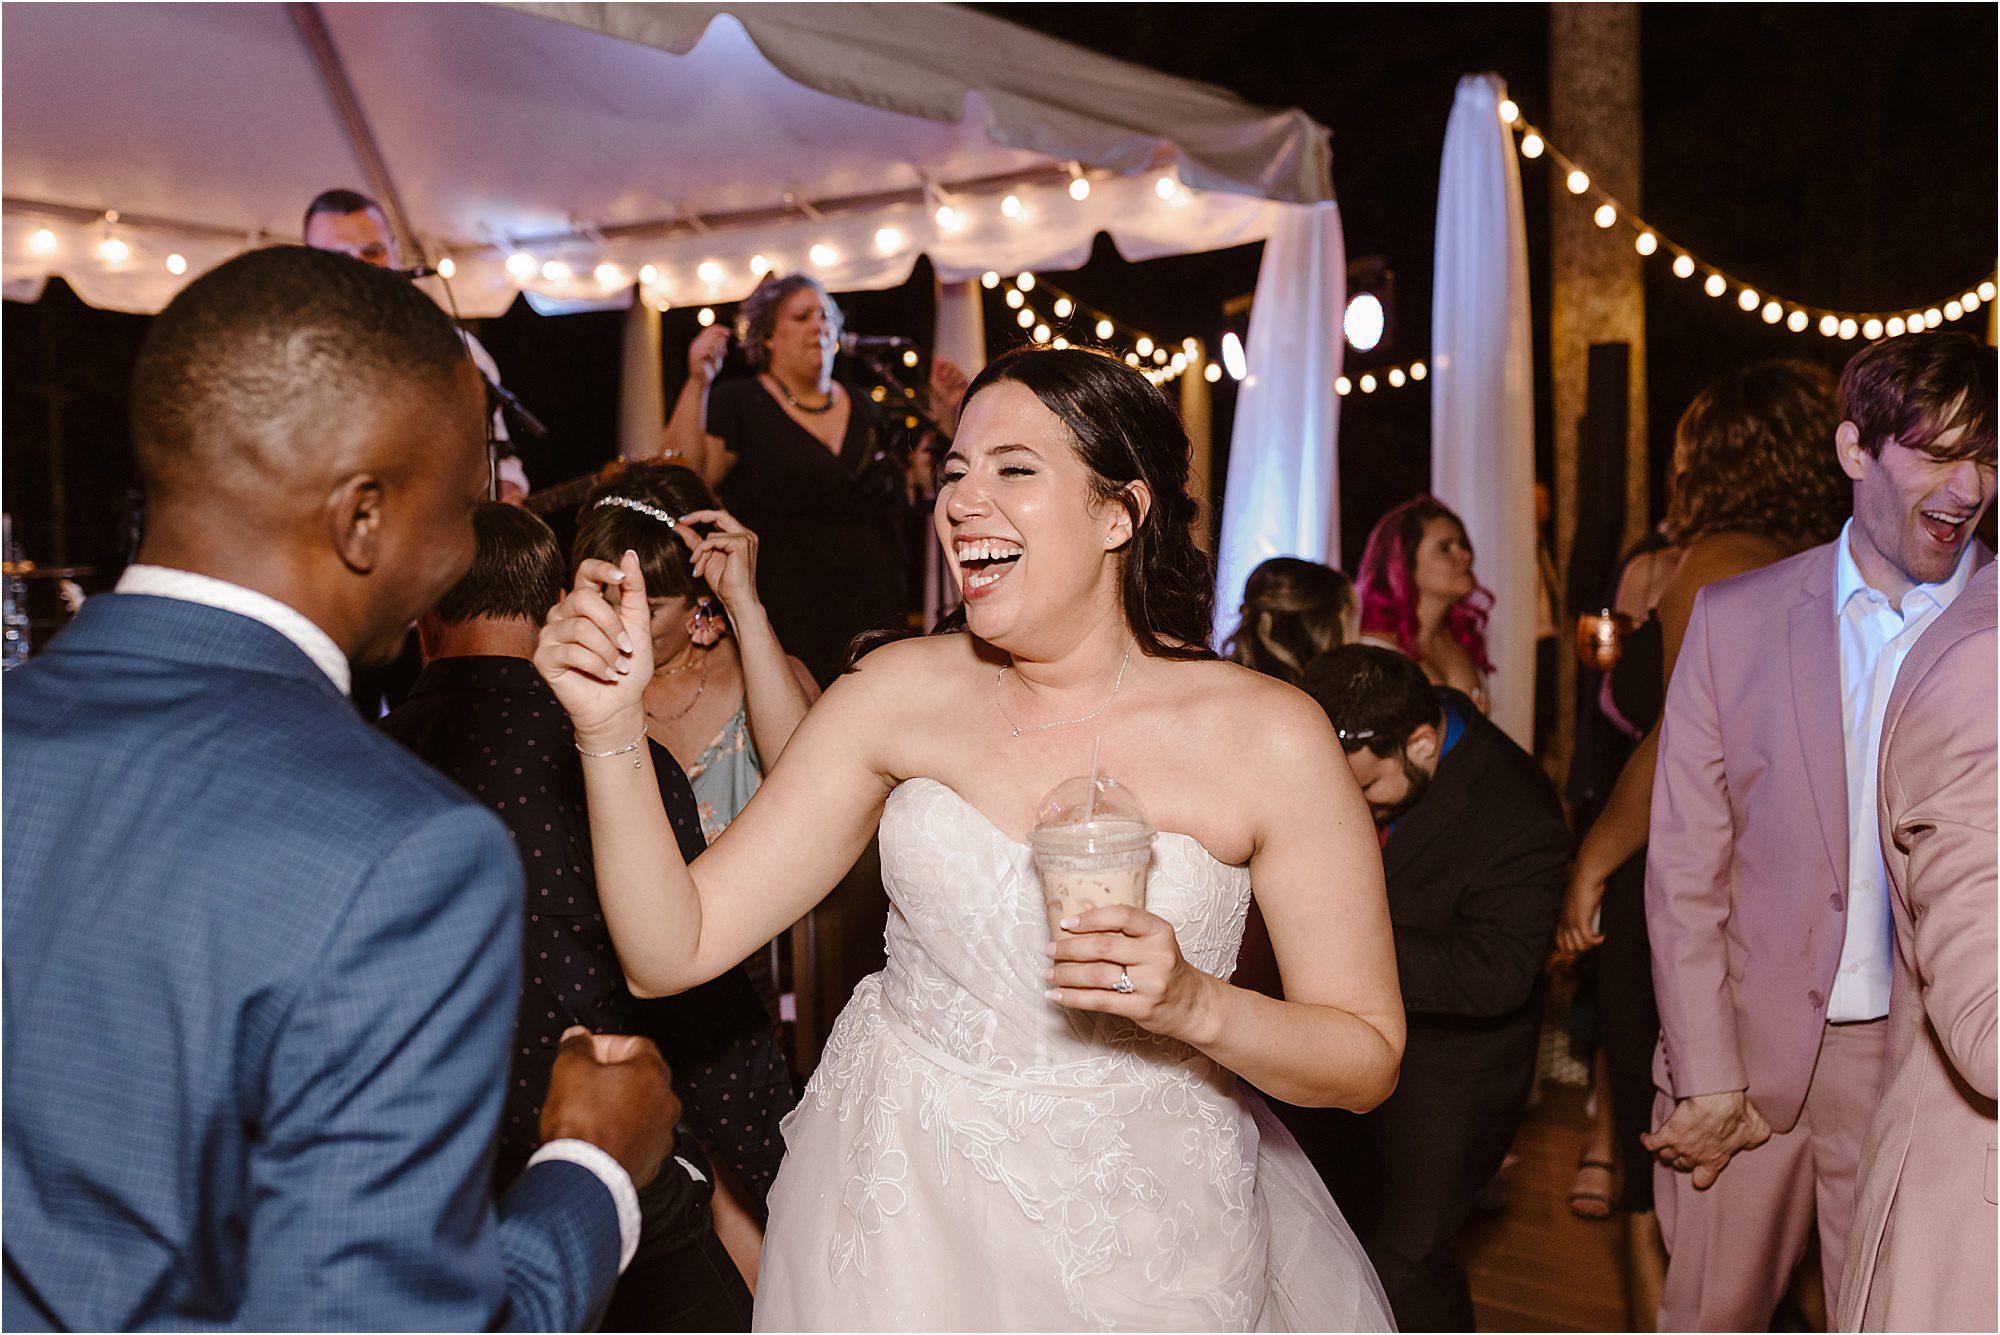 bride laughs with wedding guests at wedding reception